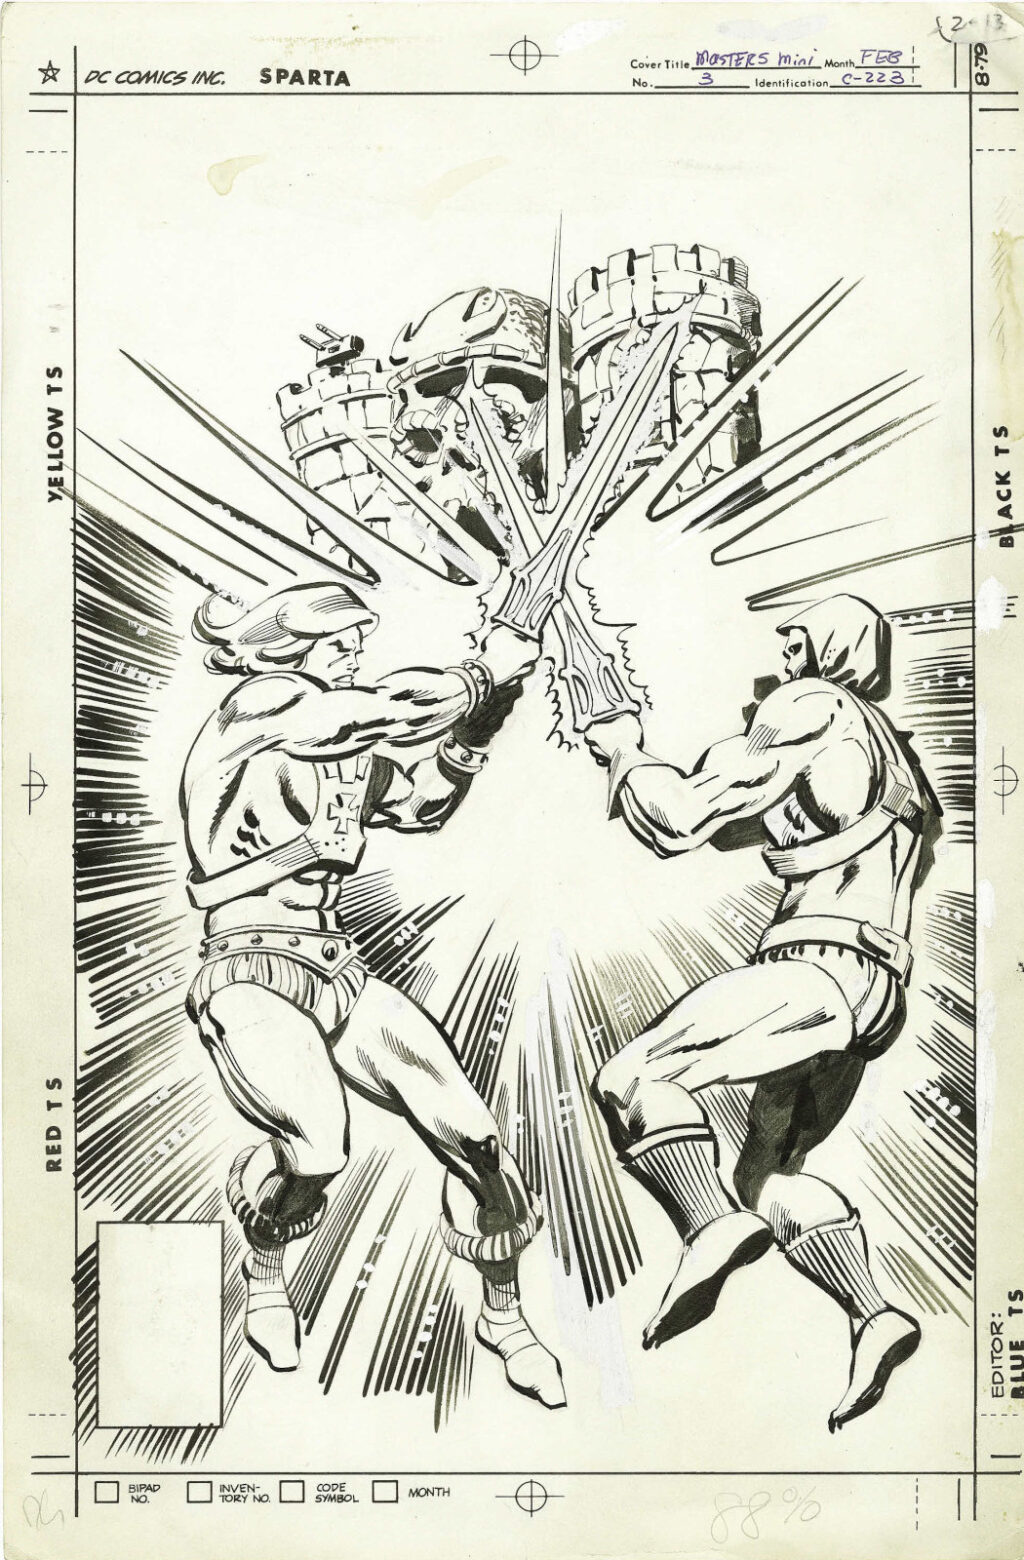 Masters Of The Universe issue 3 cover by George Tuska and Klaus Janson